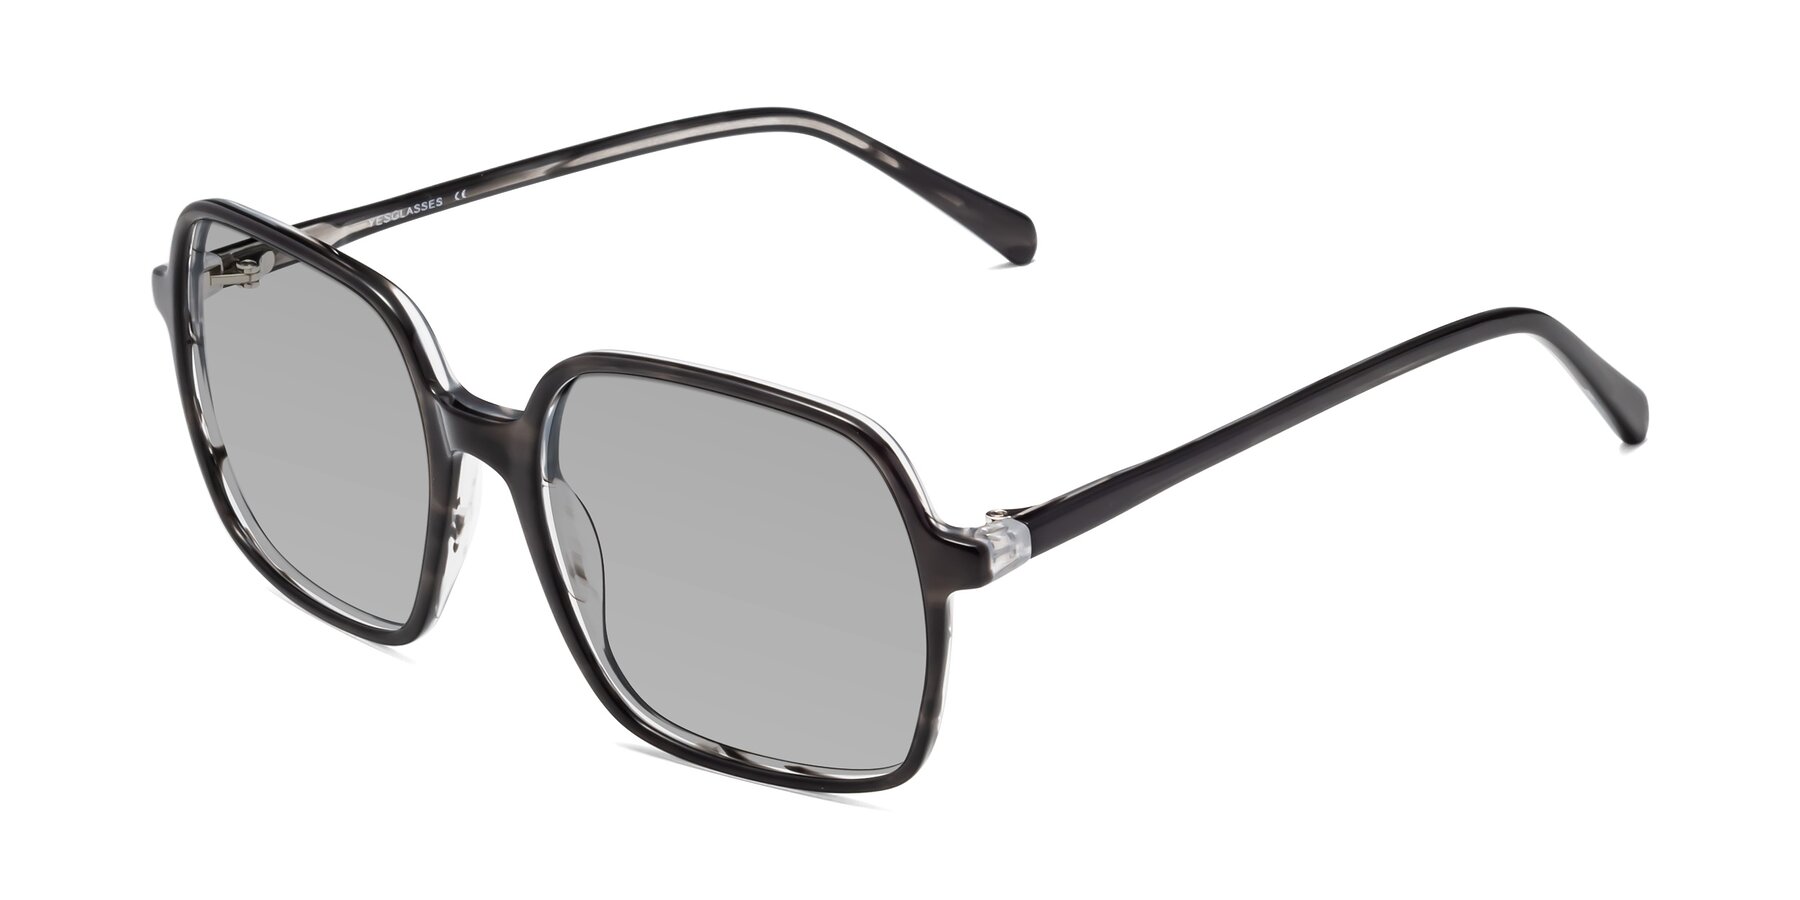 Angle of 1463 in Gray with Light Gray Tinted Lenses